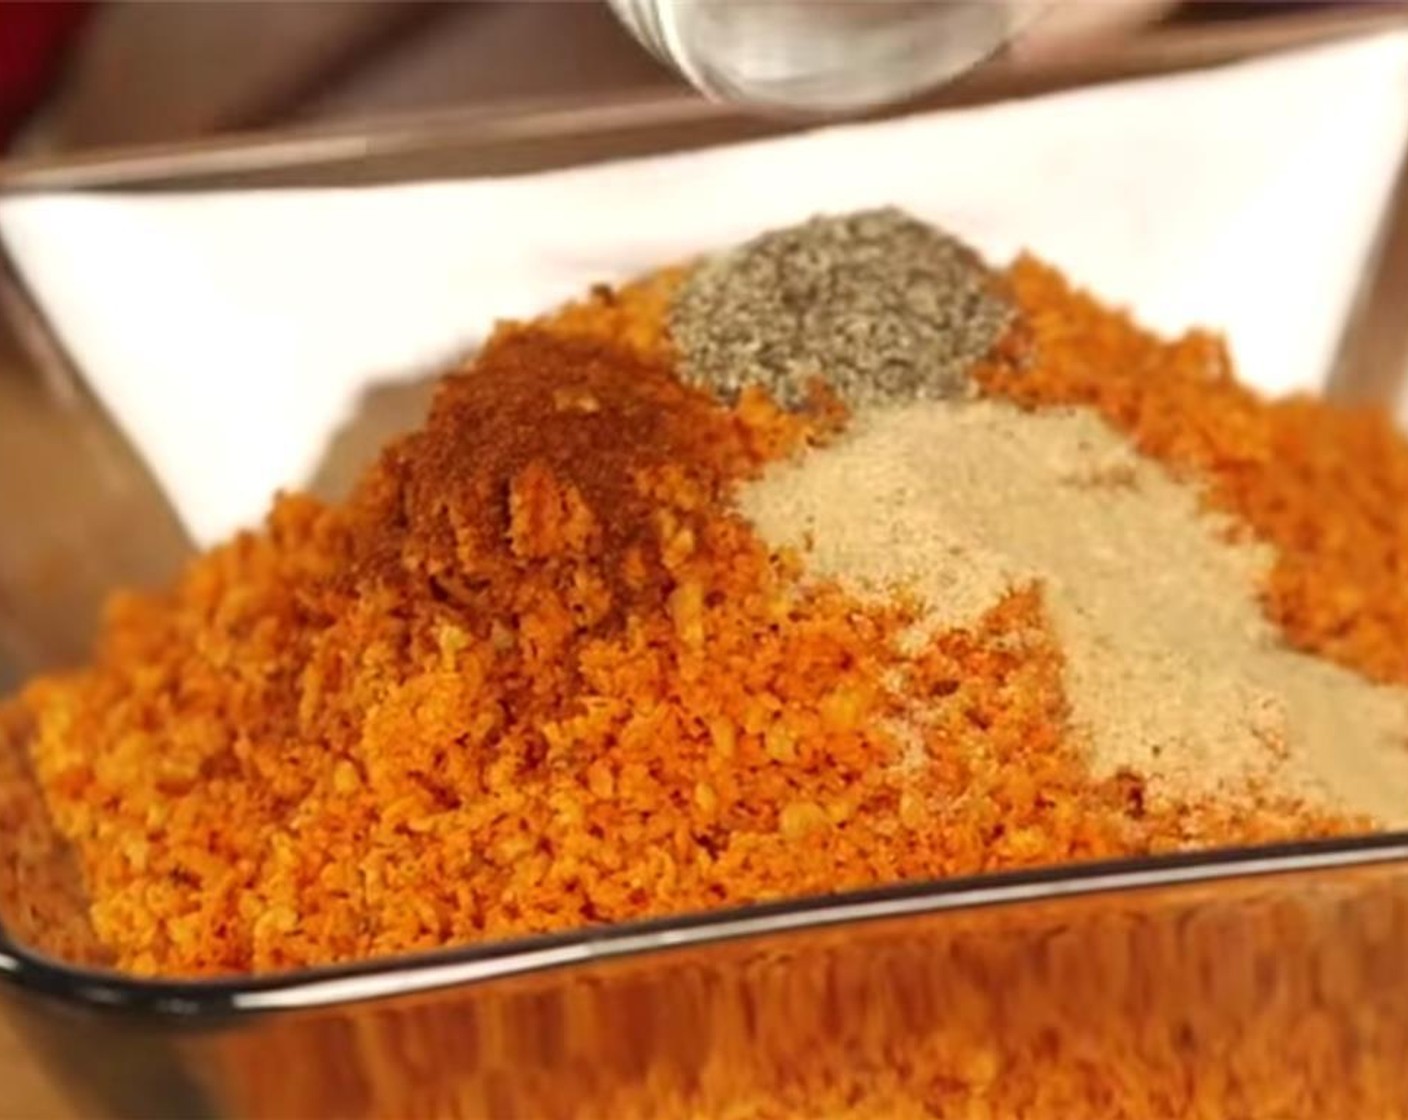 step 2 In a food processor, add Doritos® Nacho Cheese Flavored Tortilla Chips (1 1/2 cups), Spicy Nacho Cheese Tortilla Chips (1 1/2 cups), Paprika (1 tsp), Ground Black Pepper (1 tsp), and McCormick® Garlic Powder (1/2 Tbsp), and pulse until it resembles coarse breadcrumbs.